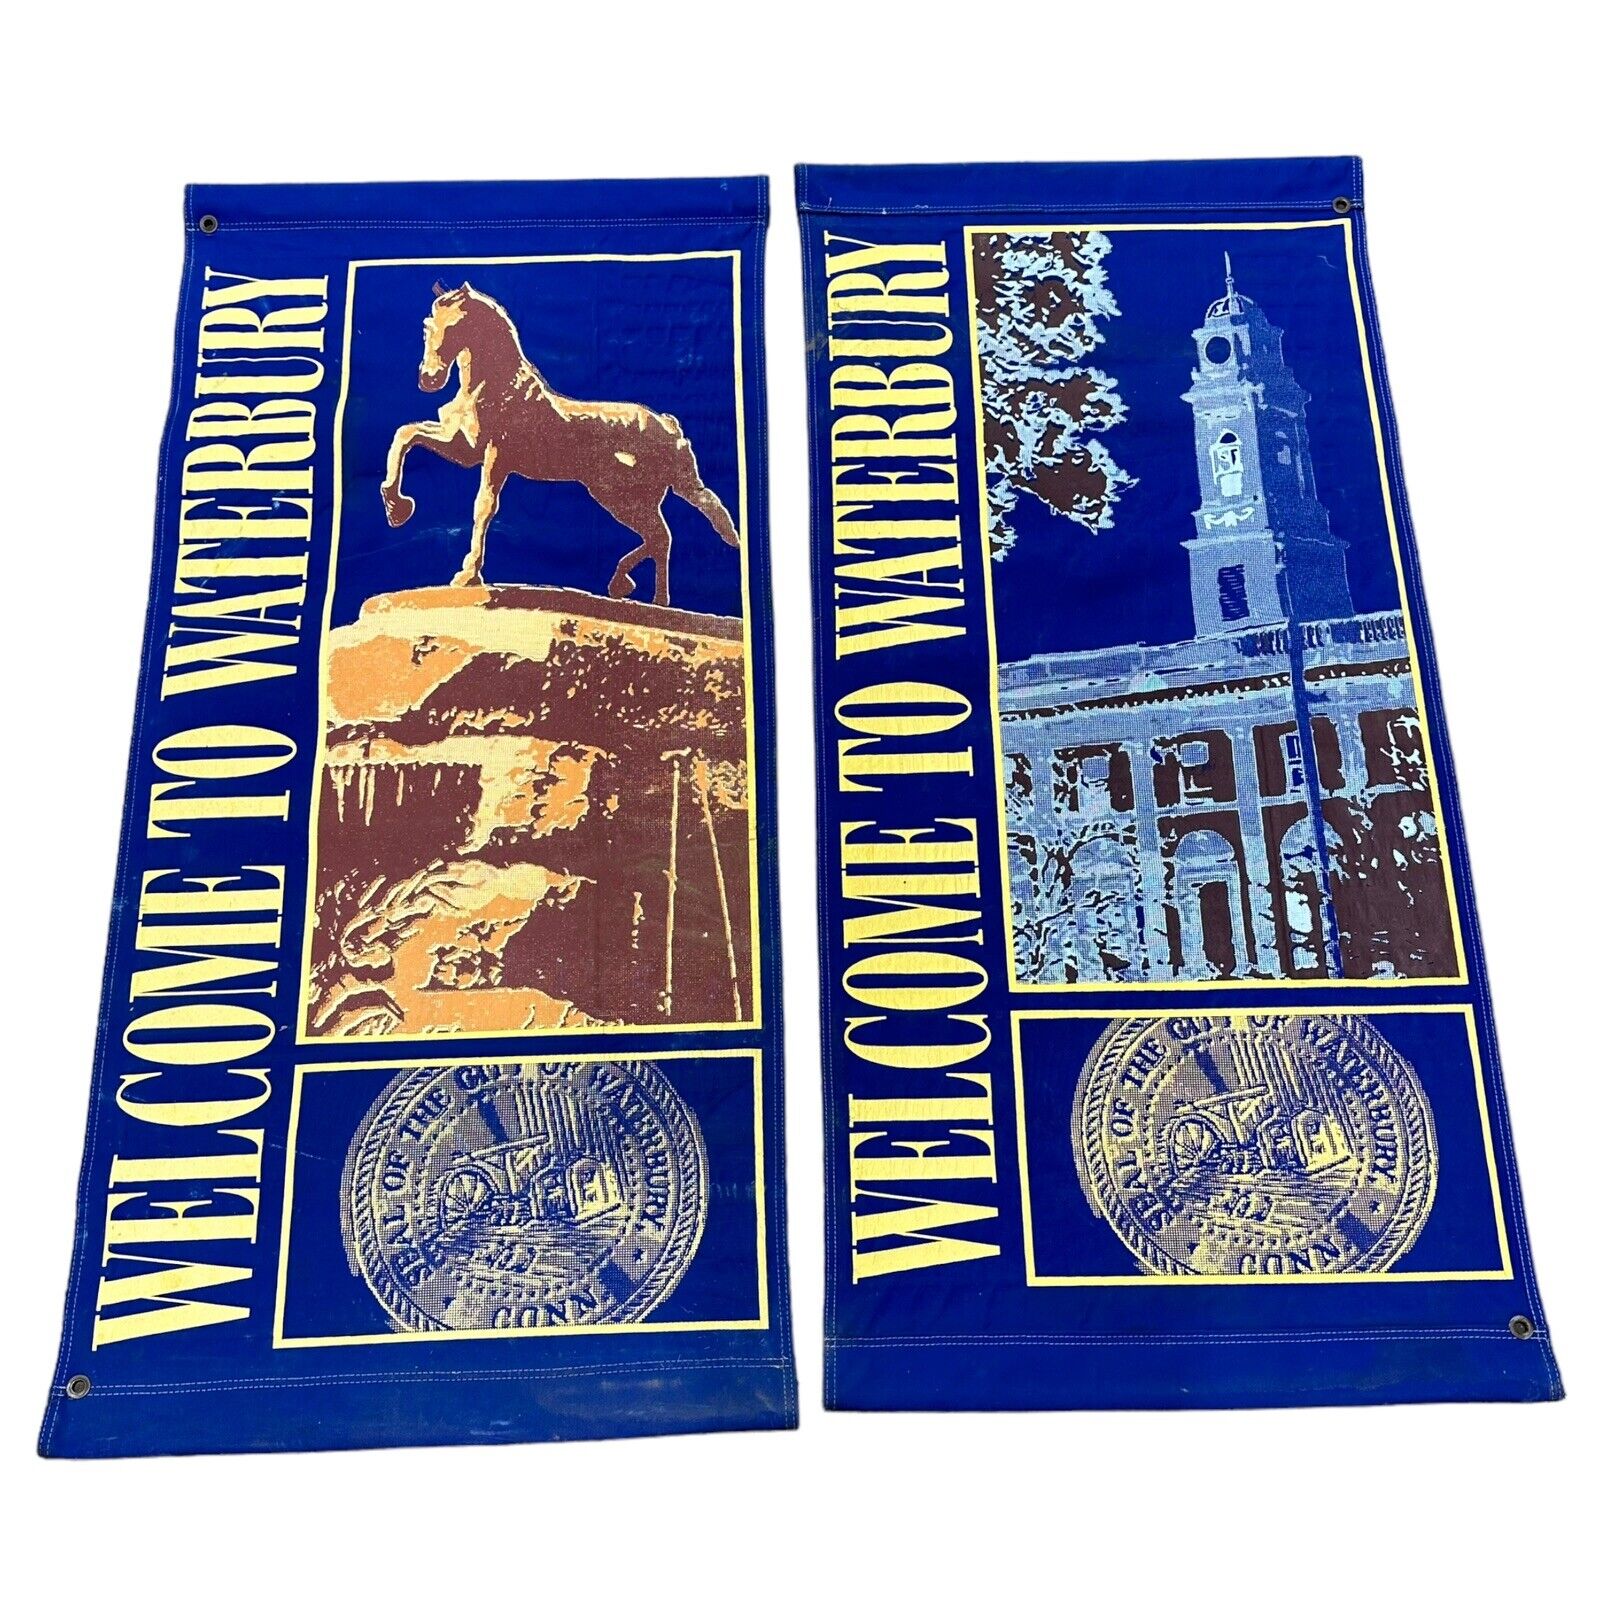 Vintage 1950-60s Waterbury Town Welcome Banners 58.5x27.5